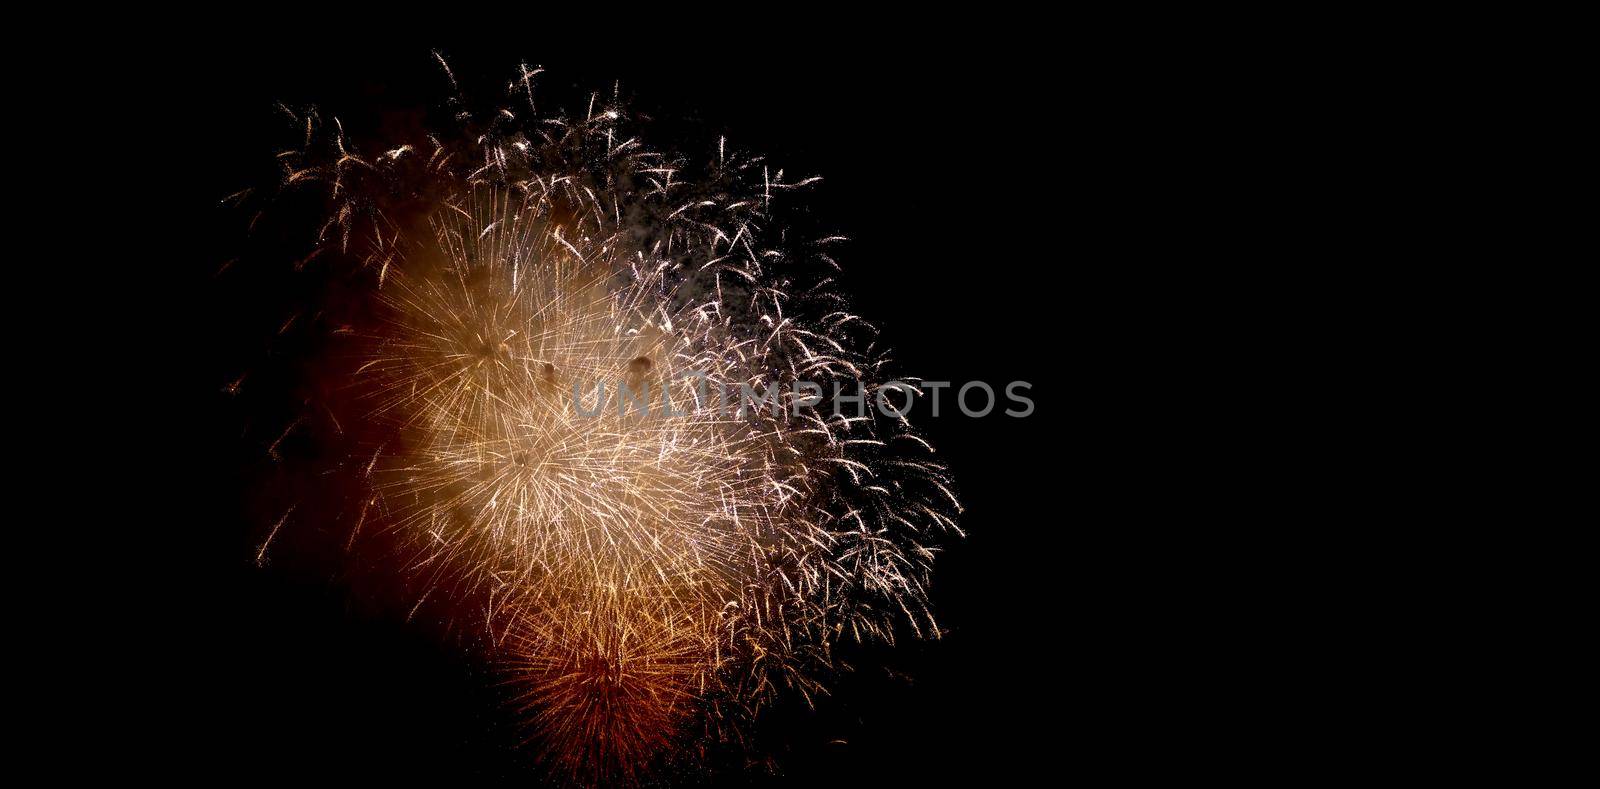 Colorful fireworks of various colors over night sky, Real Fireworks on Deep Black Background Sky on Fireworks festival show before independence day on 4 of July. Beautiful fireworks show by EvgeniyQW